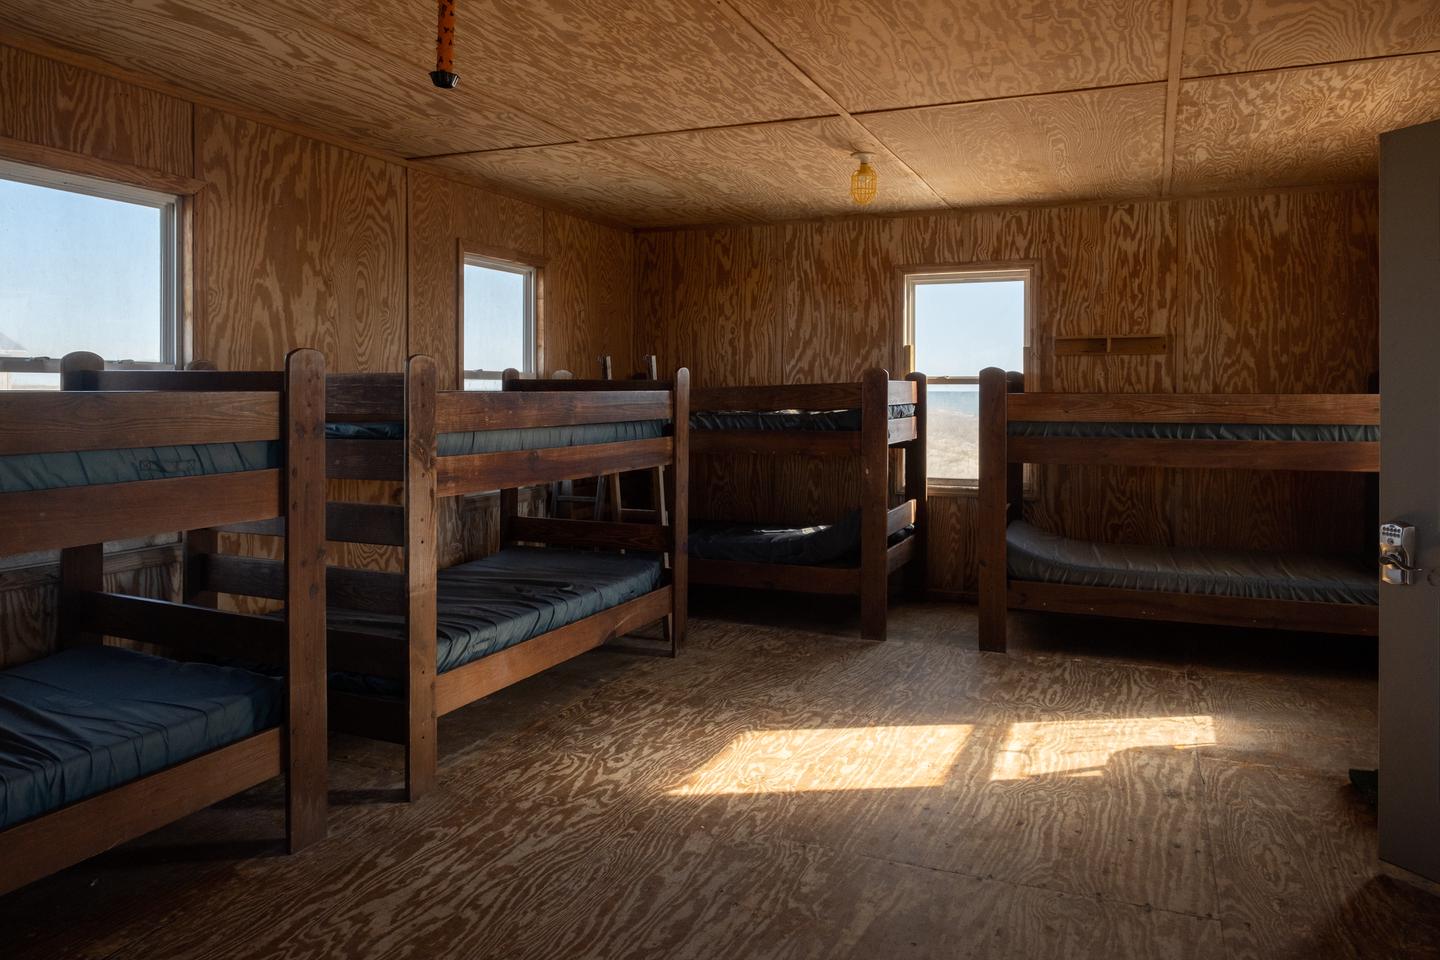 A view of the living room / bedroom area showing 4 bunk beds.Living room/bedroom area.